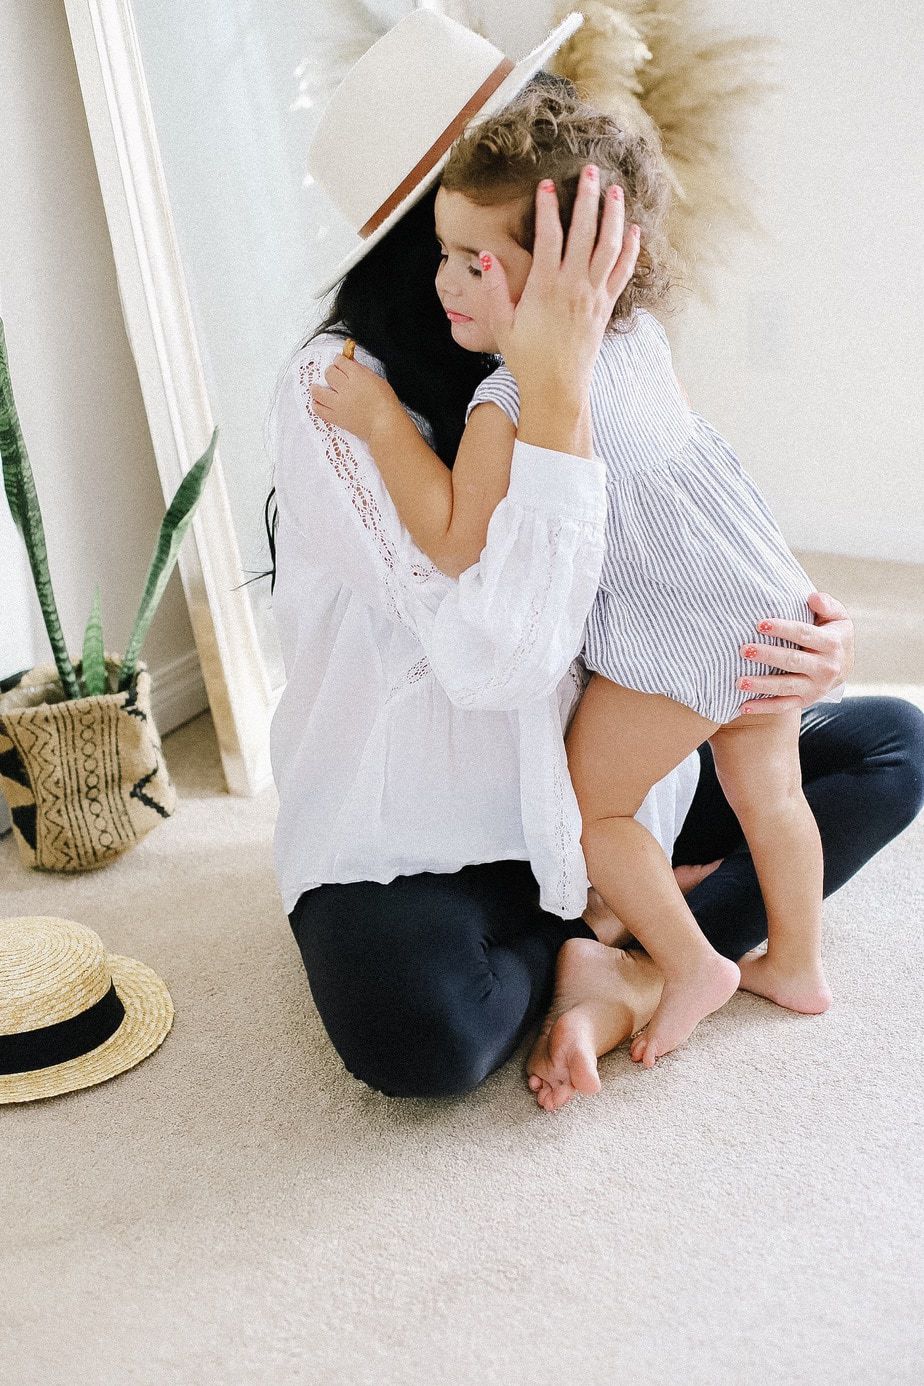 5 Relatable Ways to Survive Parenting Solo